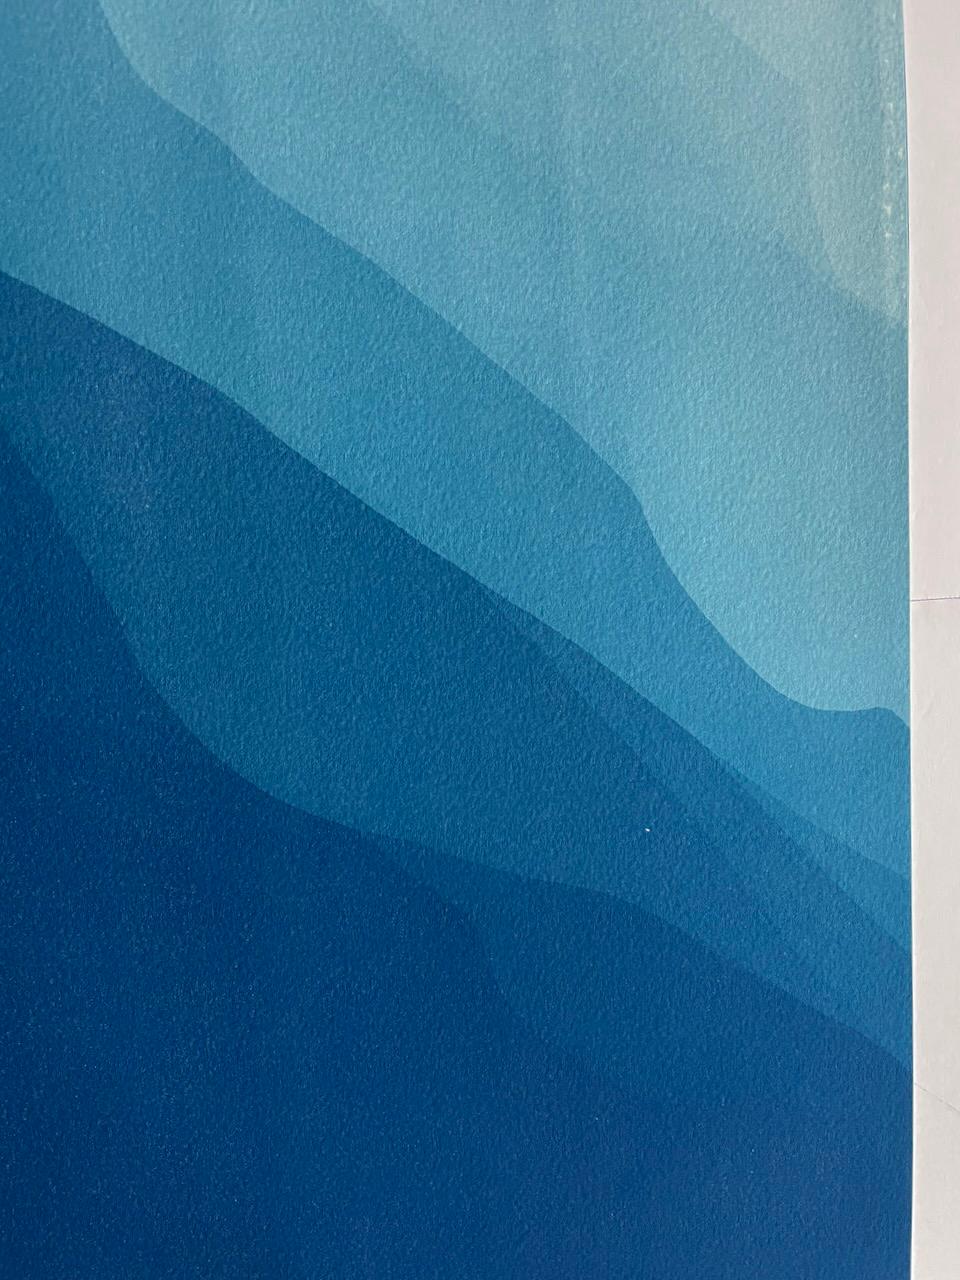 Sea Cliffs 6 (Hand-printed 40 x 20 inch abstract cyanotype) For Sale 1